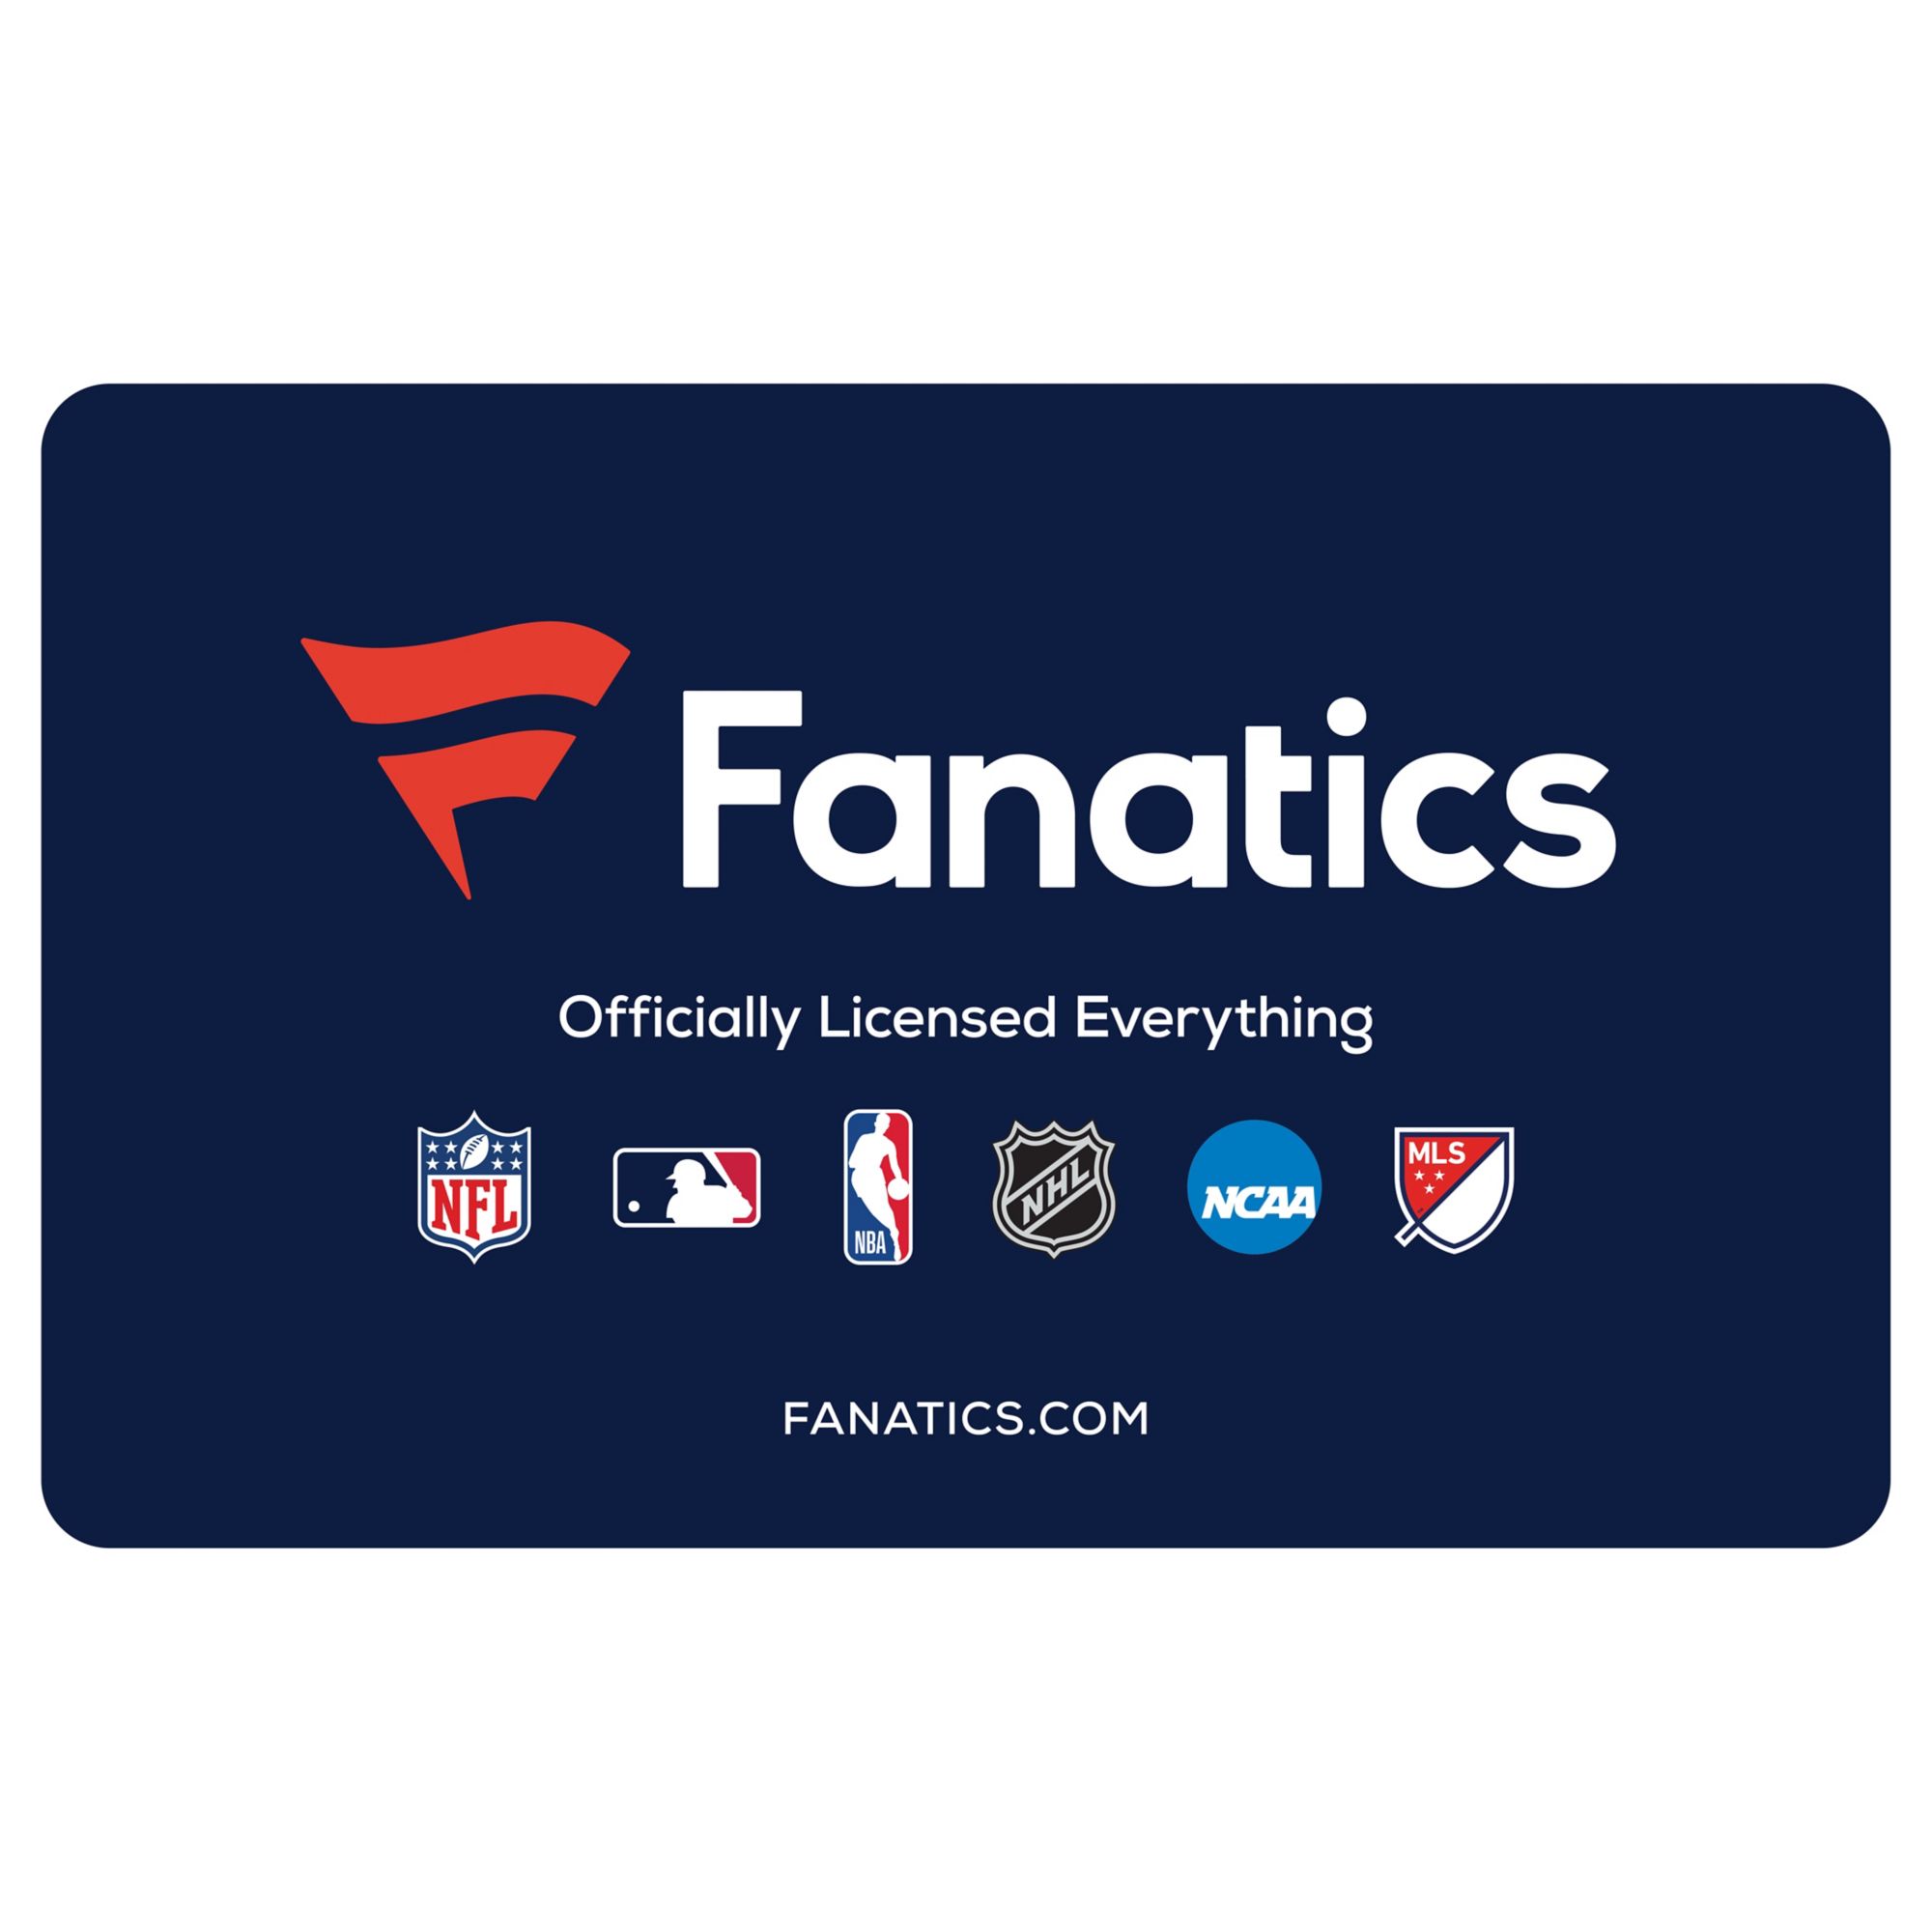 WHOLESALE LICENSED SPORTS PRODUCTS FOR NFL-NBA-MLB-NHL-NCAA